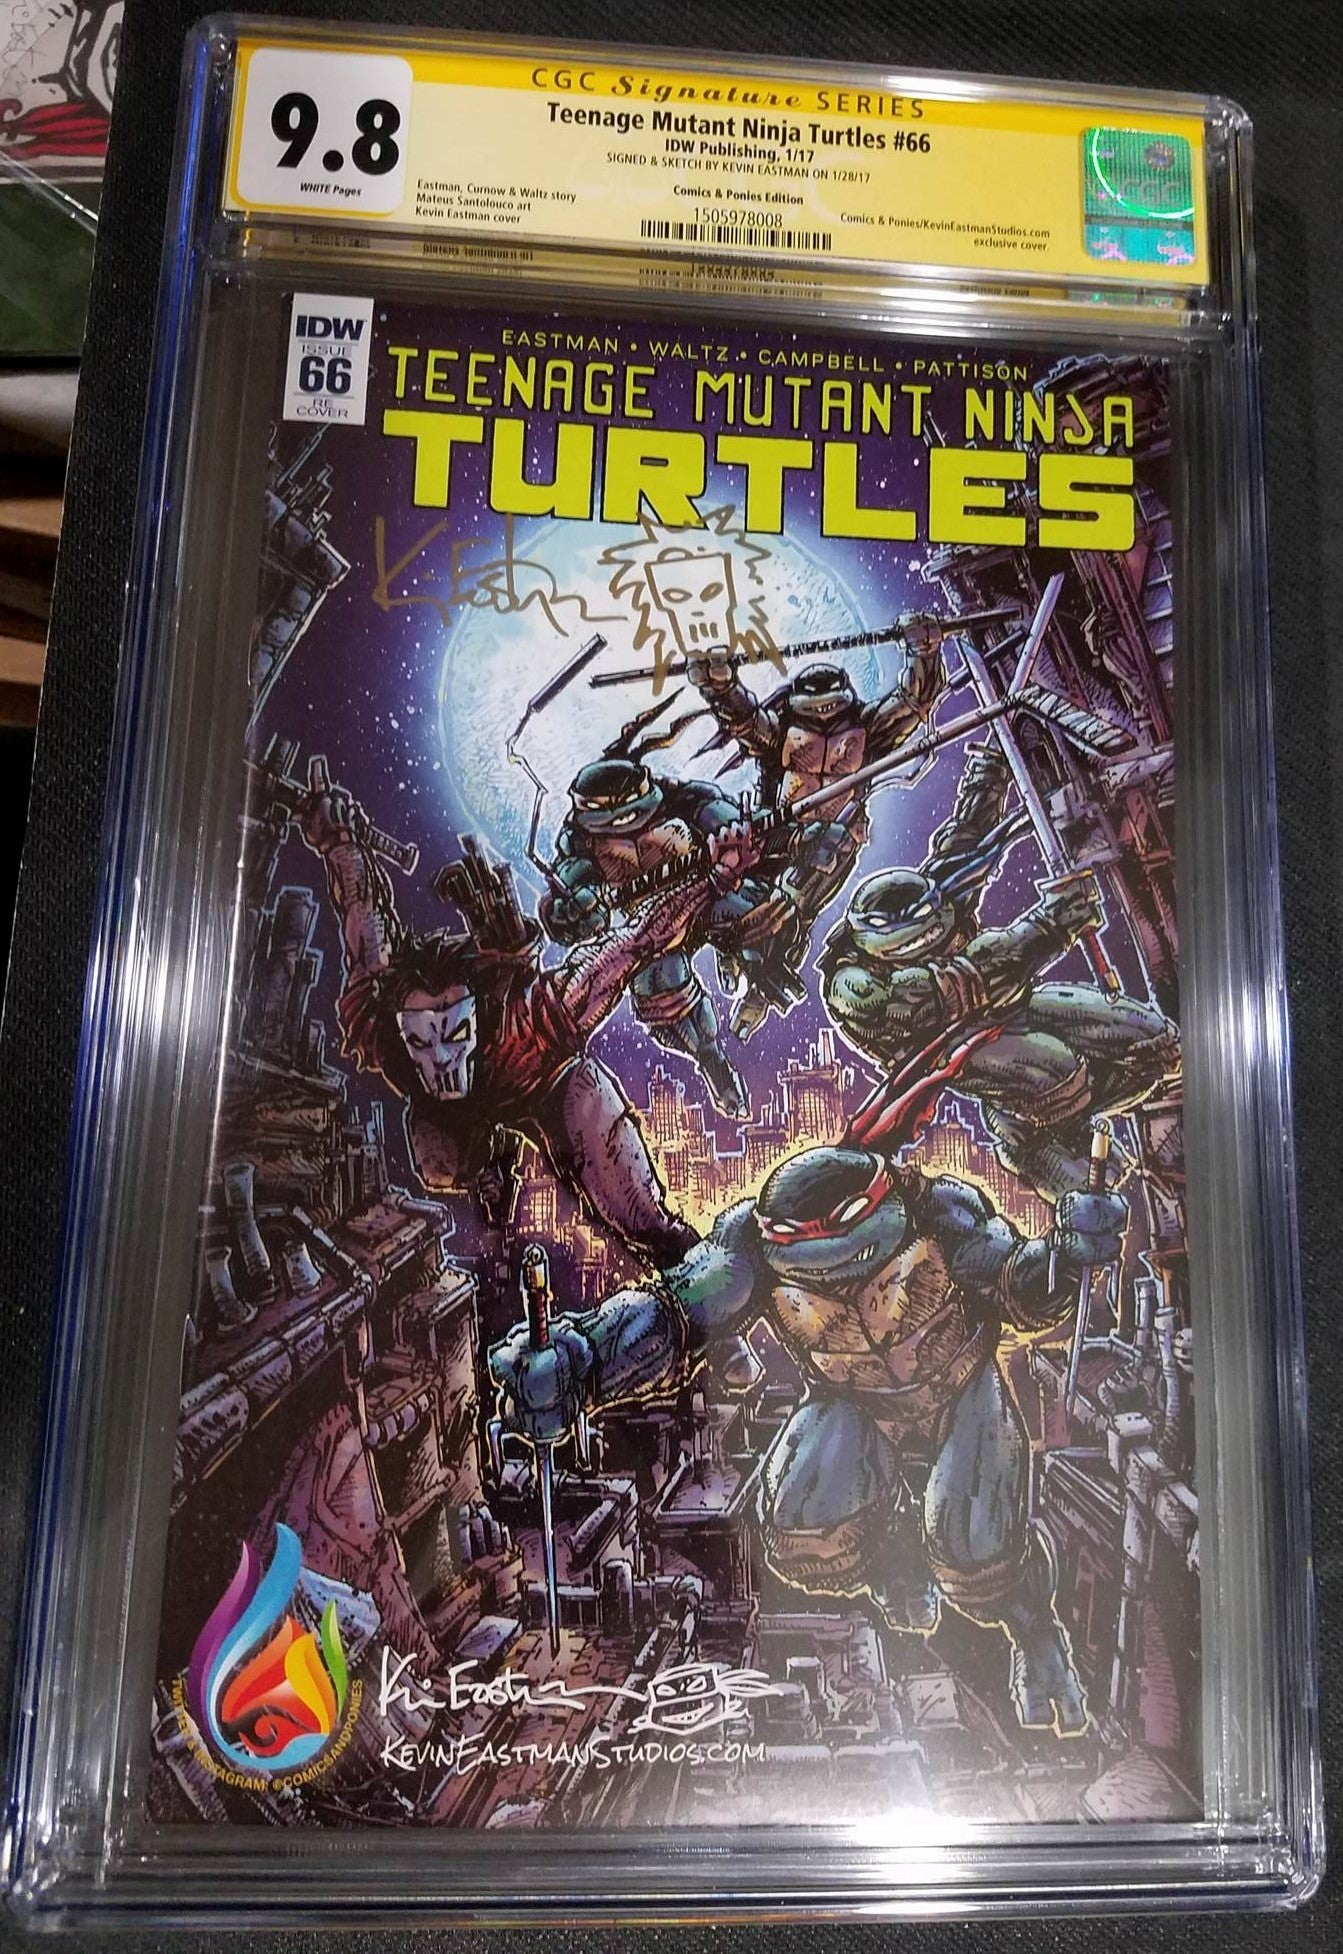 Kevin Eastman - Not on Private Signing Menu? - SigSeries Event Central -  CGC Comic Book Collectors Chat Boards